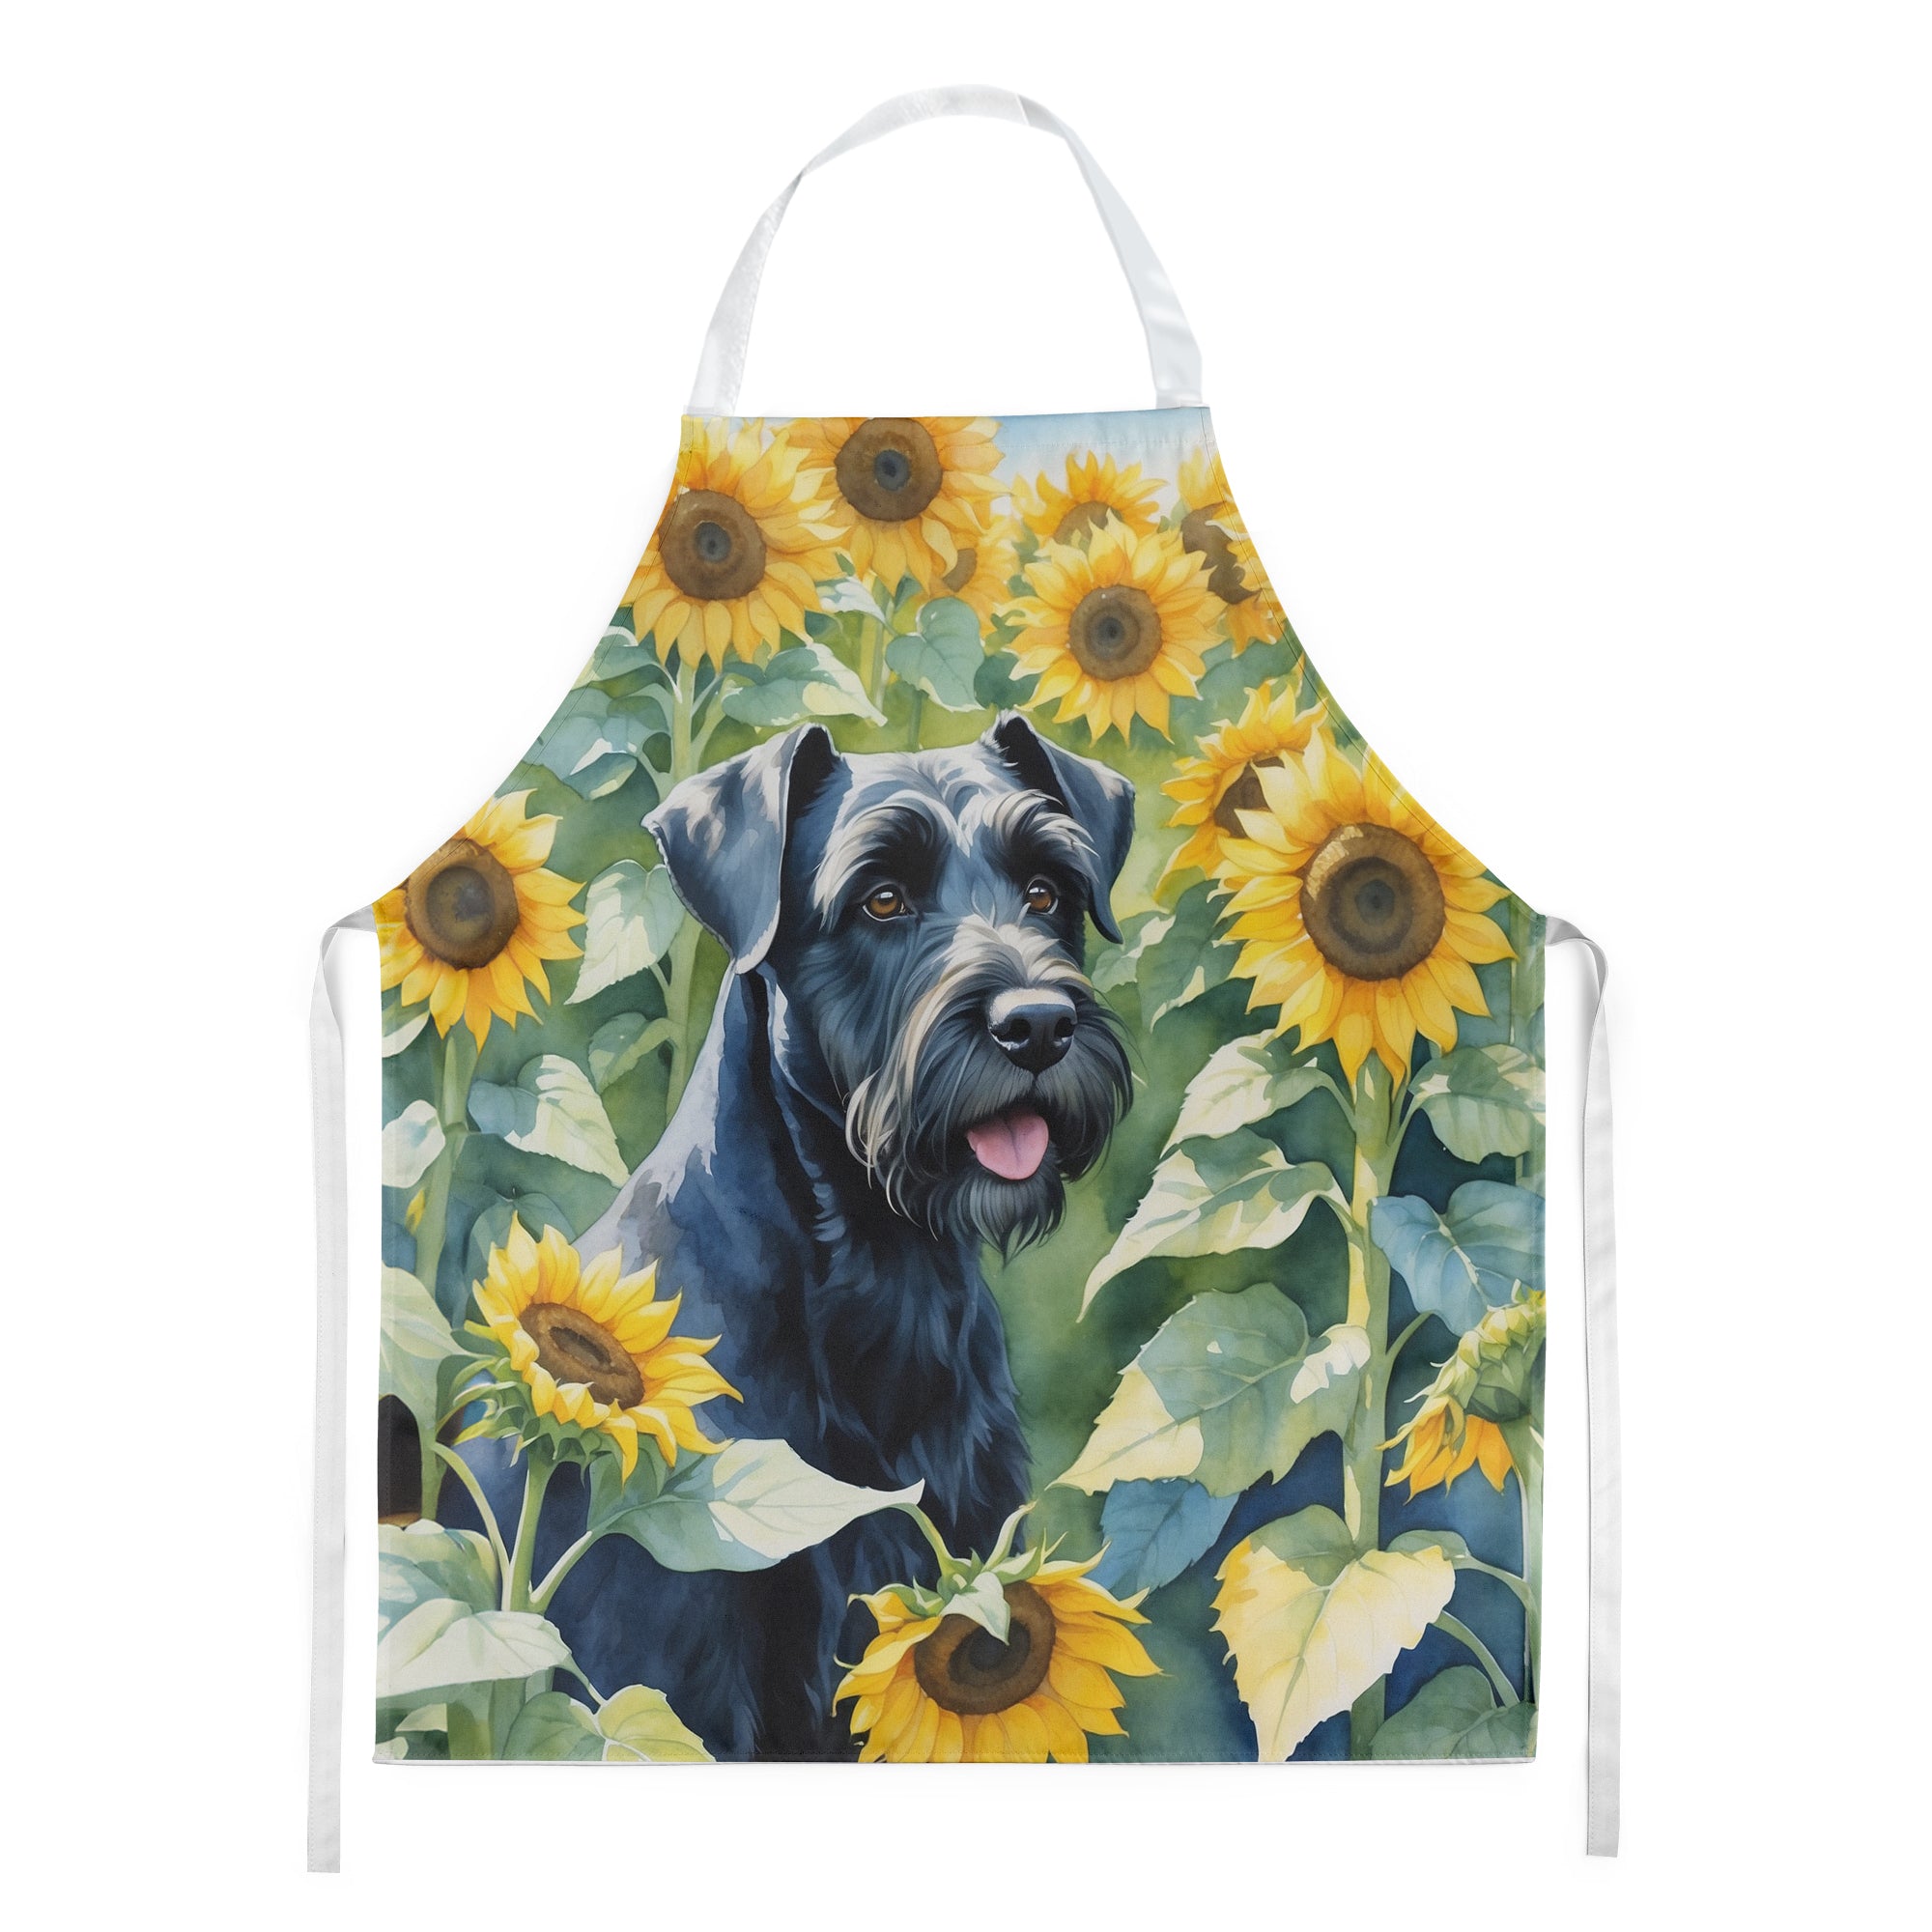 Buy this Giant Schnauzer in Sunflowers Apron